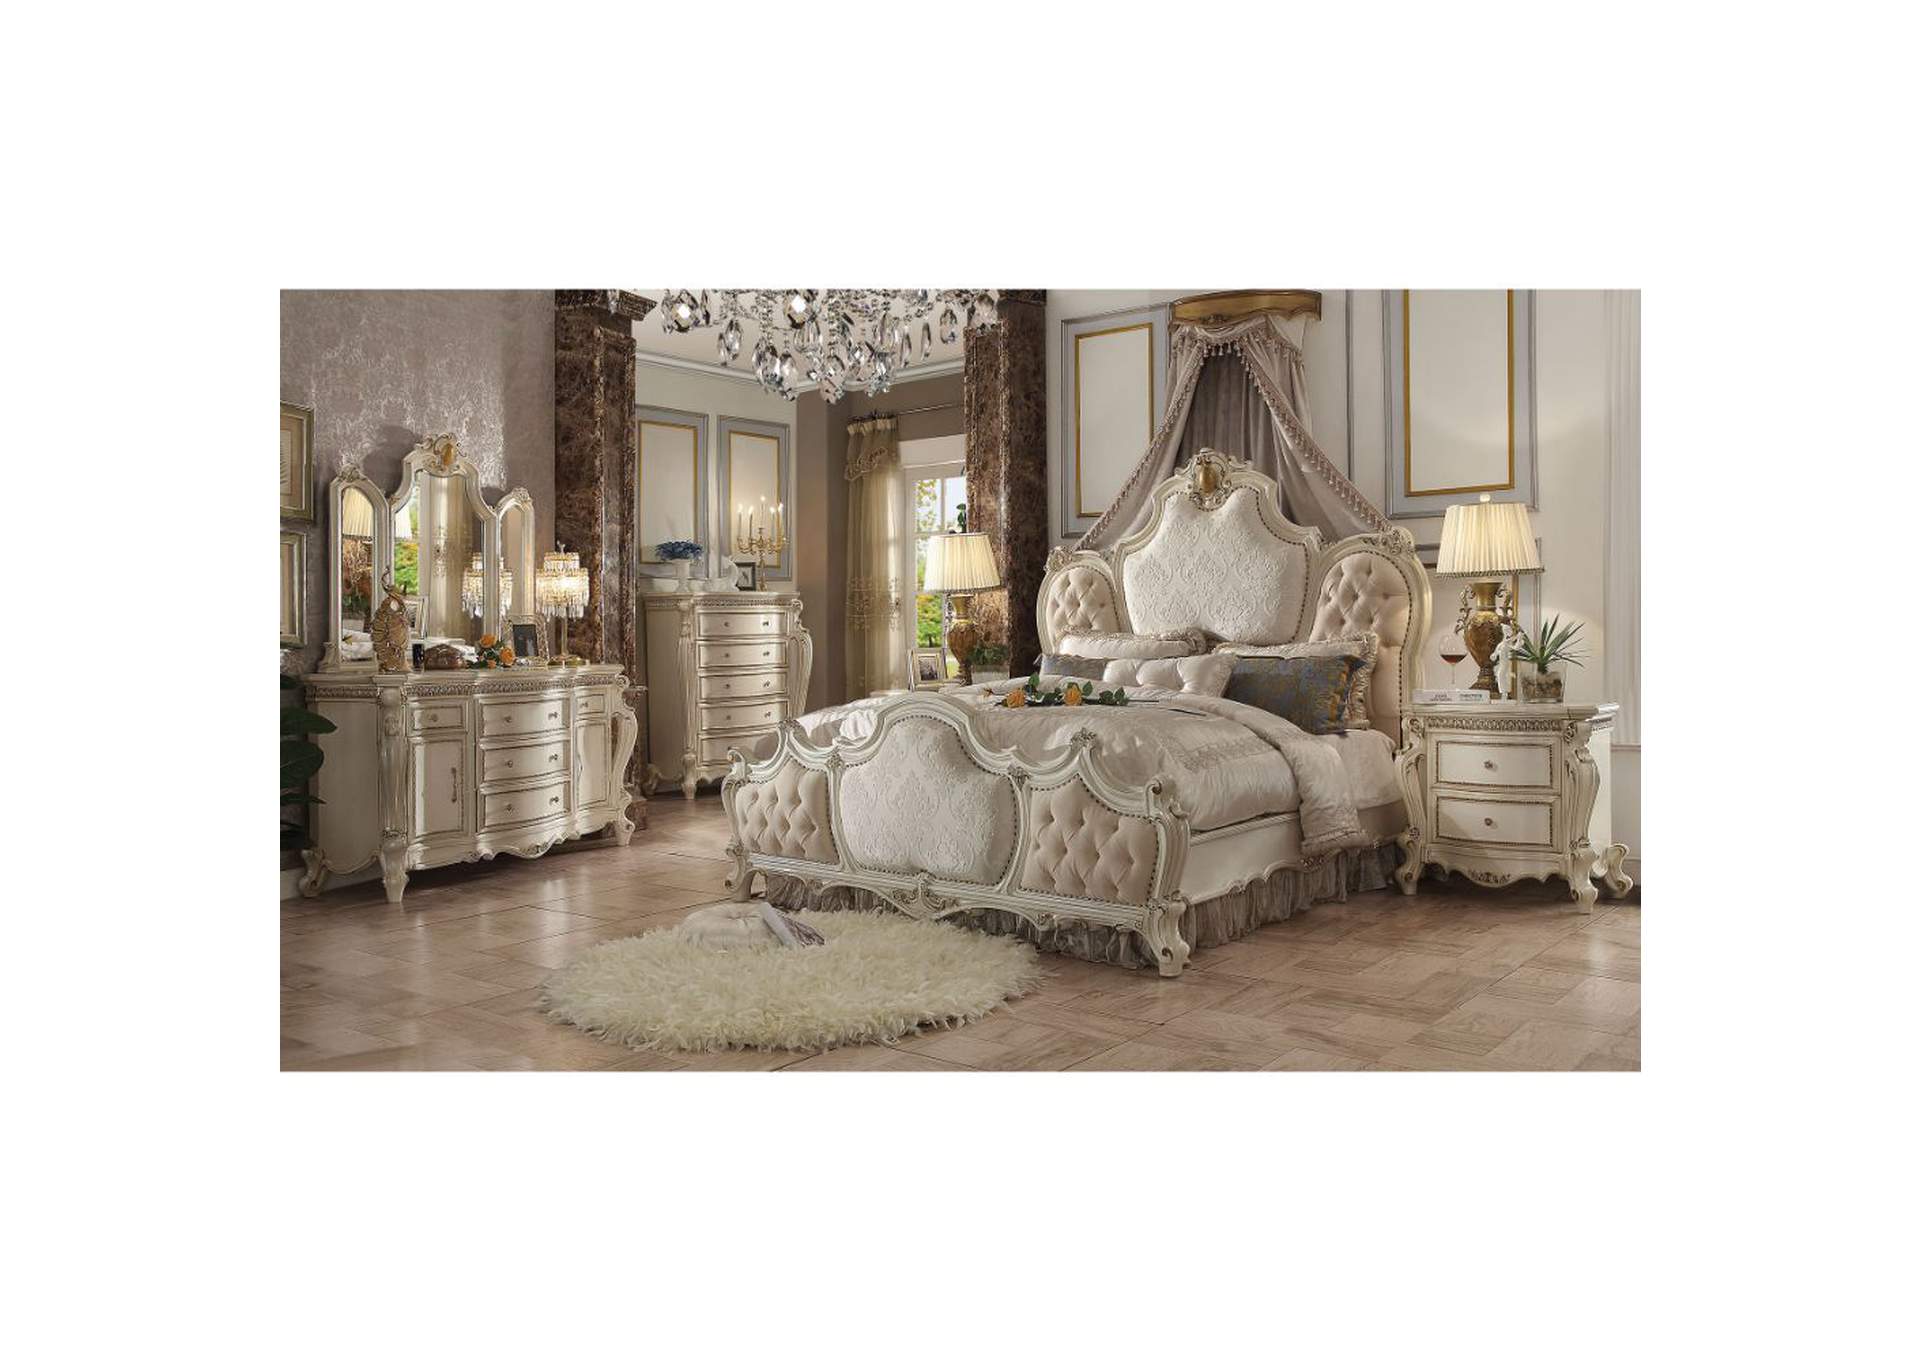 Picardy Fabric & Antique Pearl California King Bed,Acme